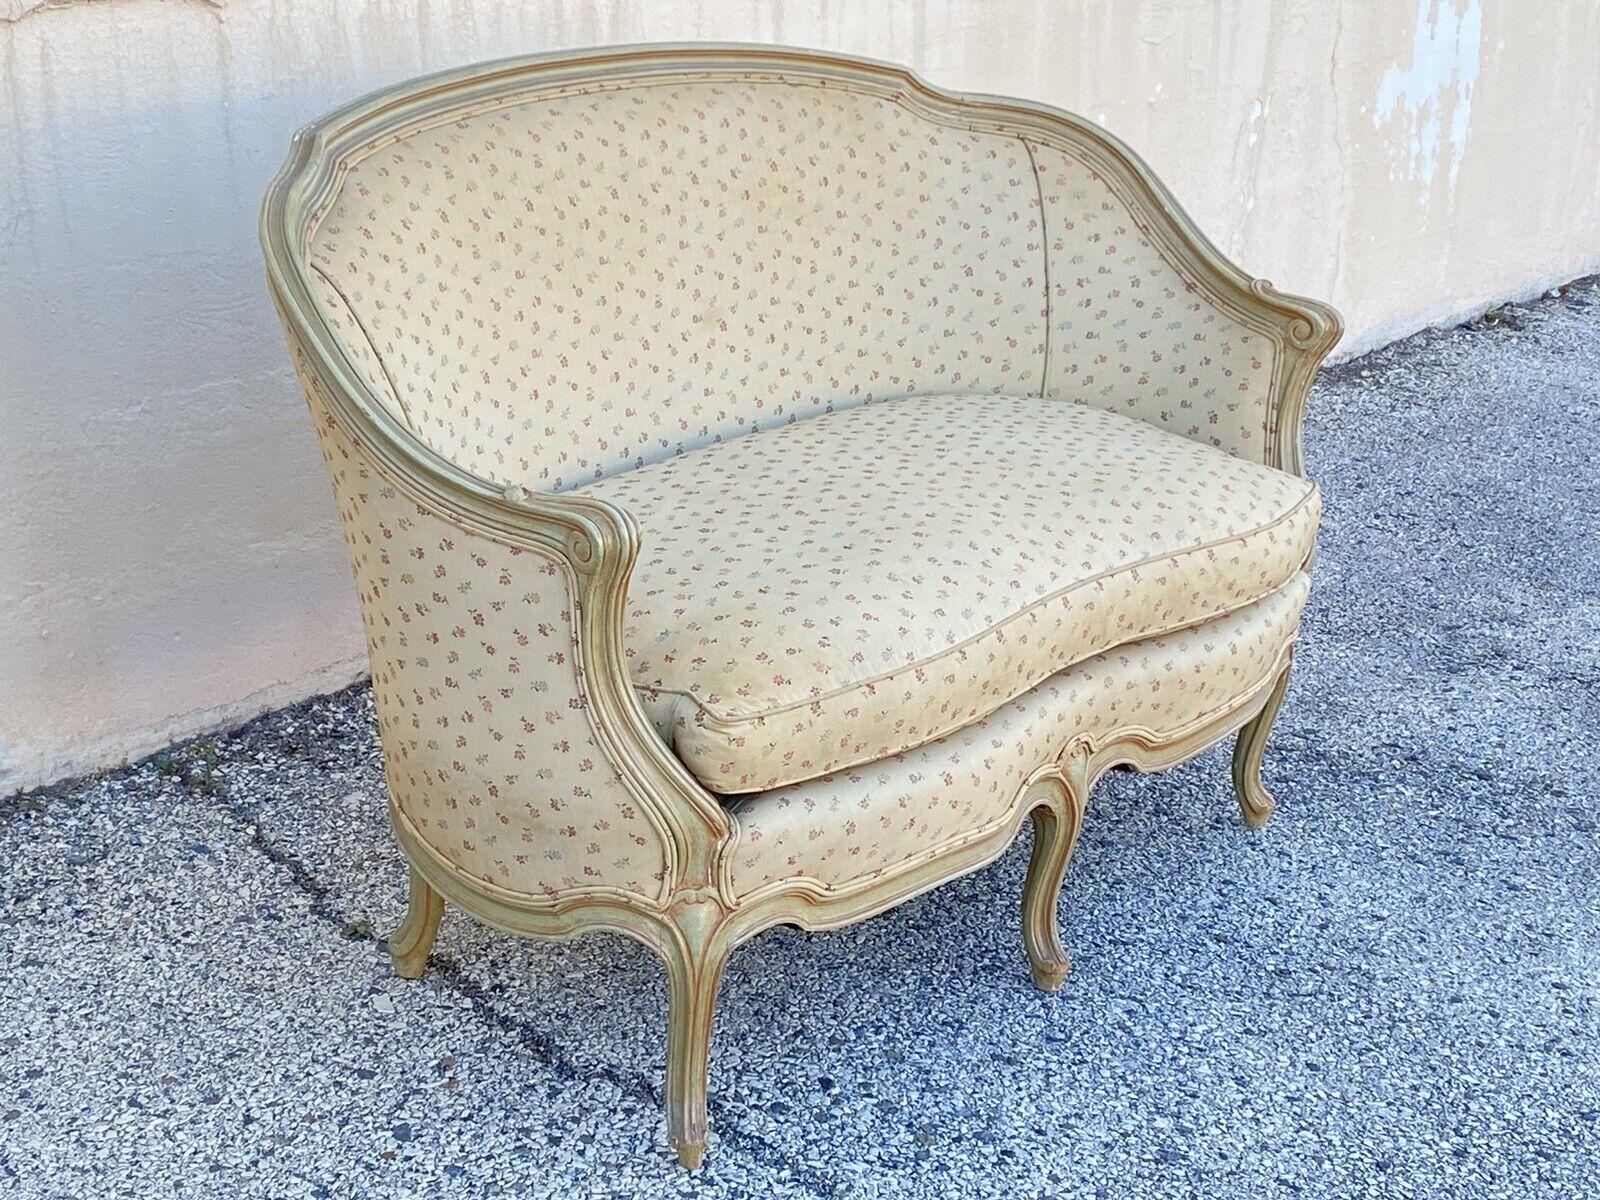 Vintage French Provincial Louis XV Style Green Pink Barrel Back Loveseat Settee. Item features a solid wood barrel back frame, distressed green and pink painted finish, cabriole legs, very nice vintage item, great style and form. Circa Mid 20th